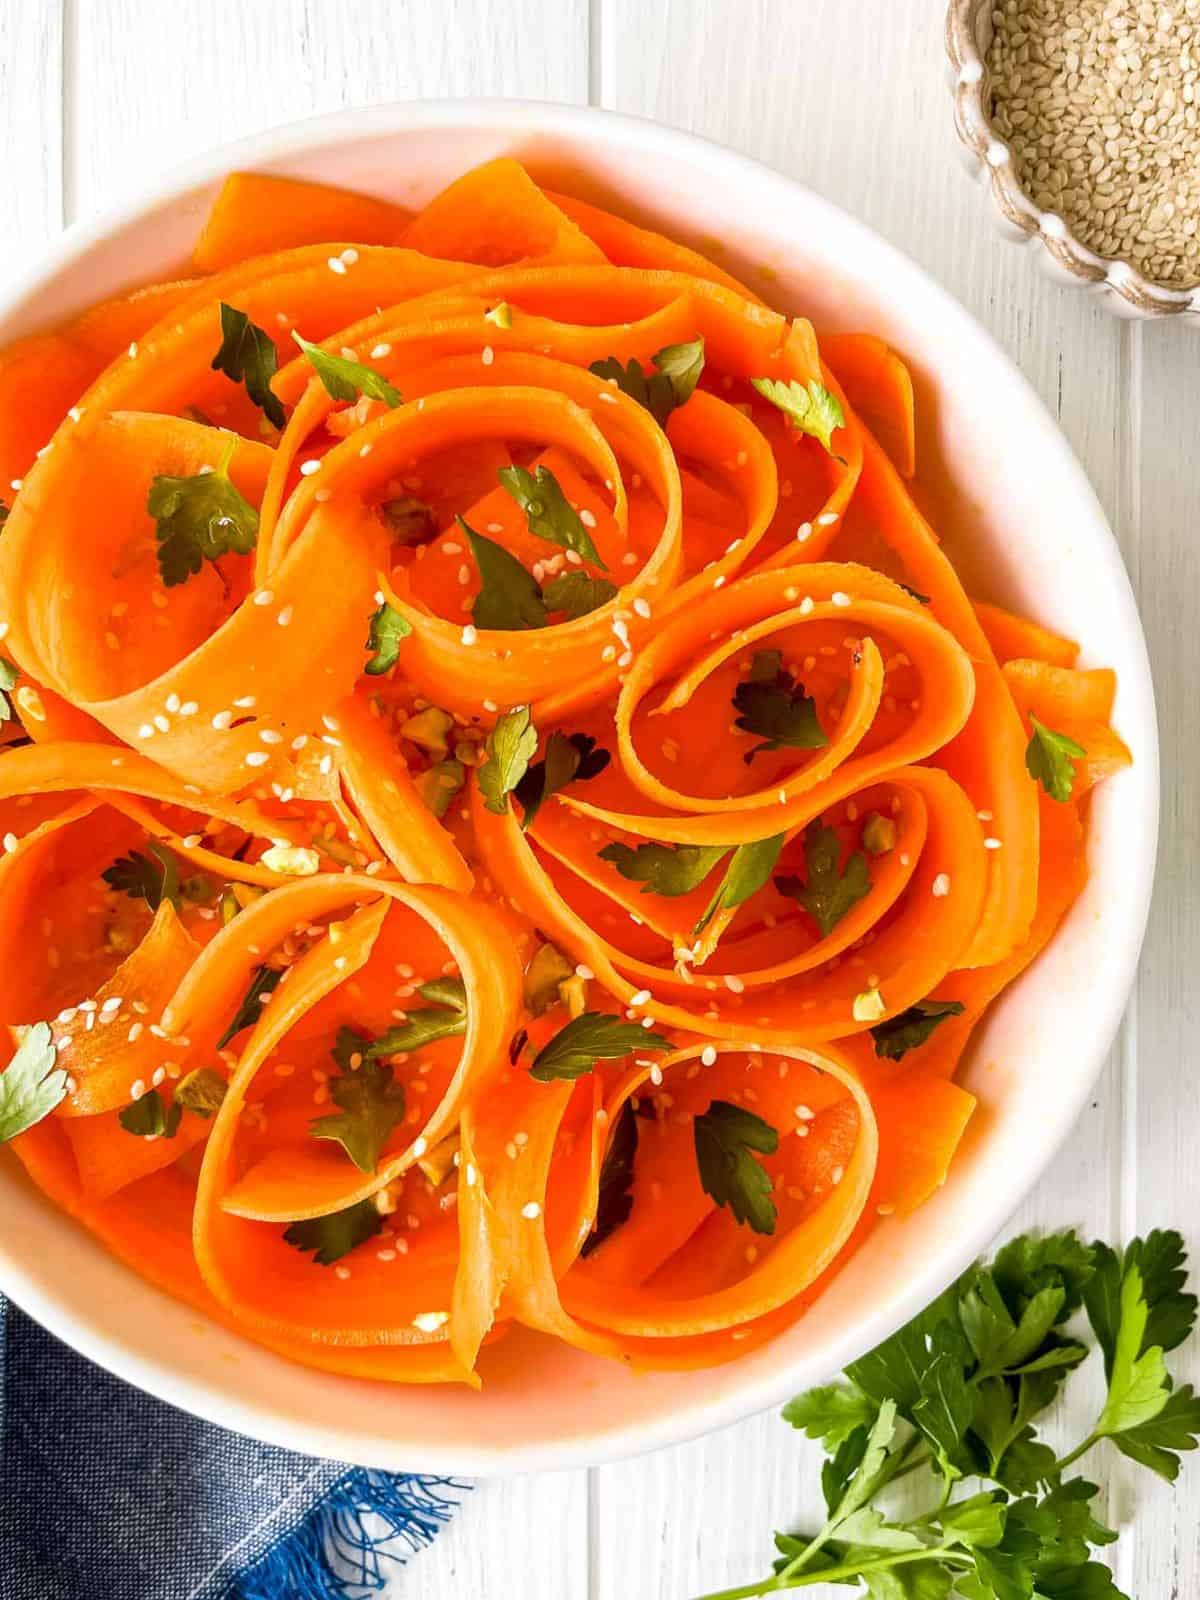 raw carrot salad in a white bowl sprinkled with sesame seeds and parsley next to a bowl of sesame seeds.